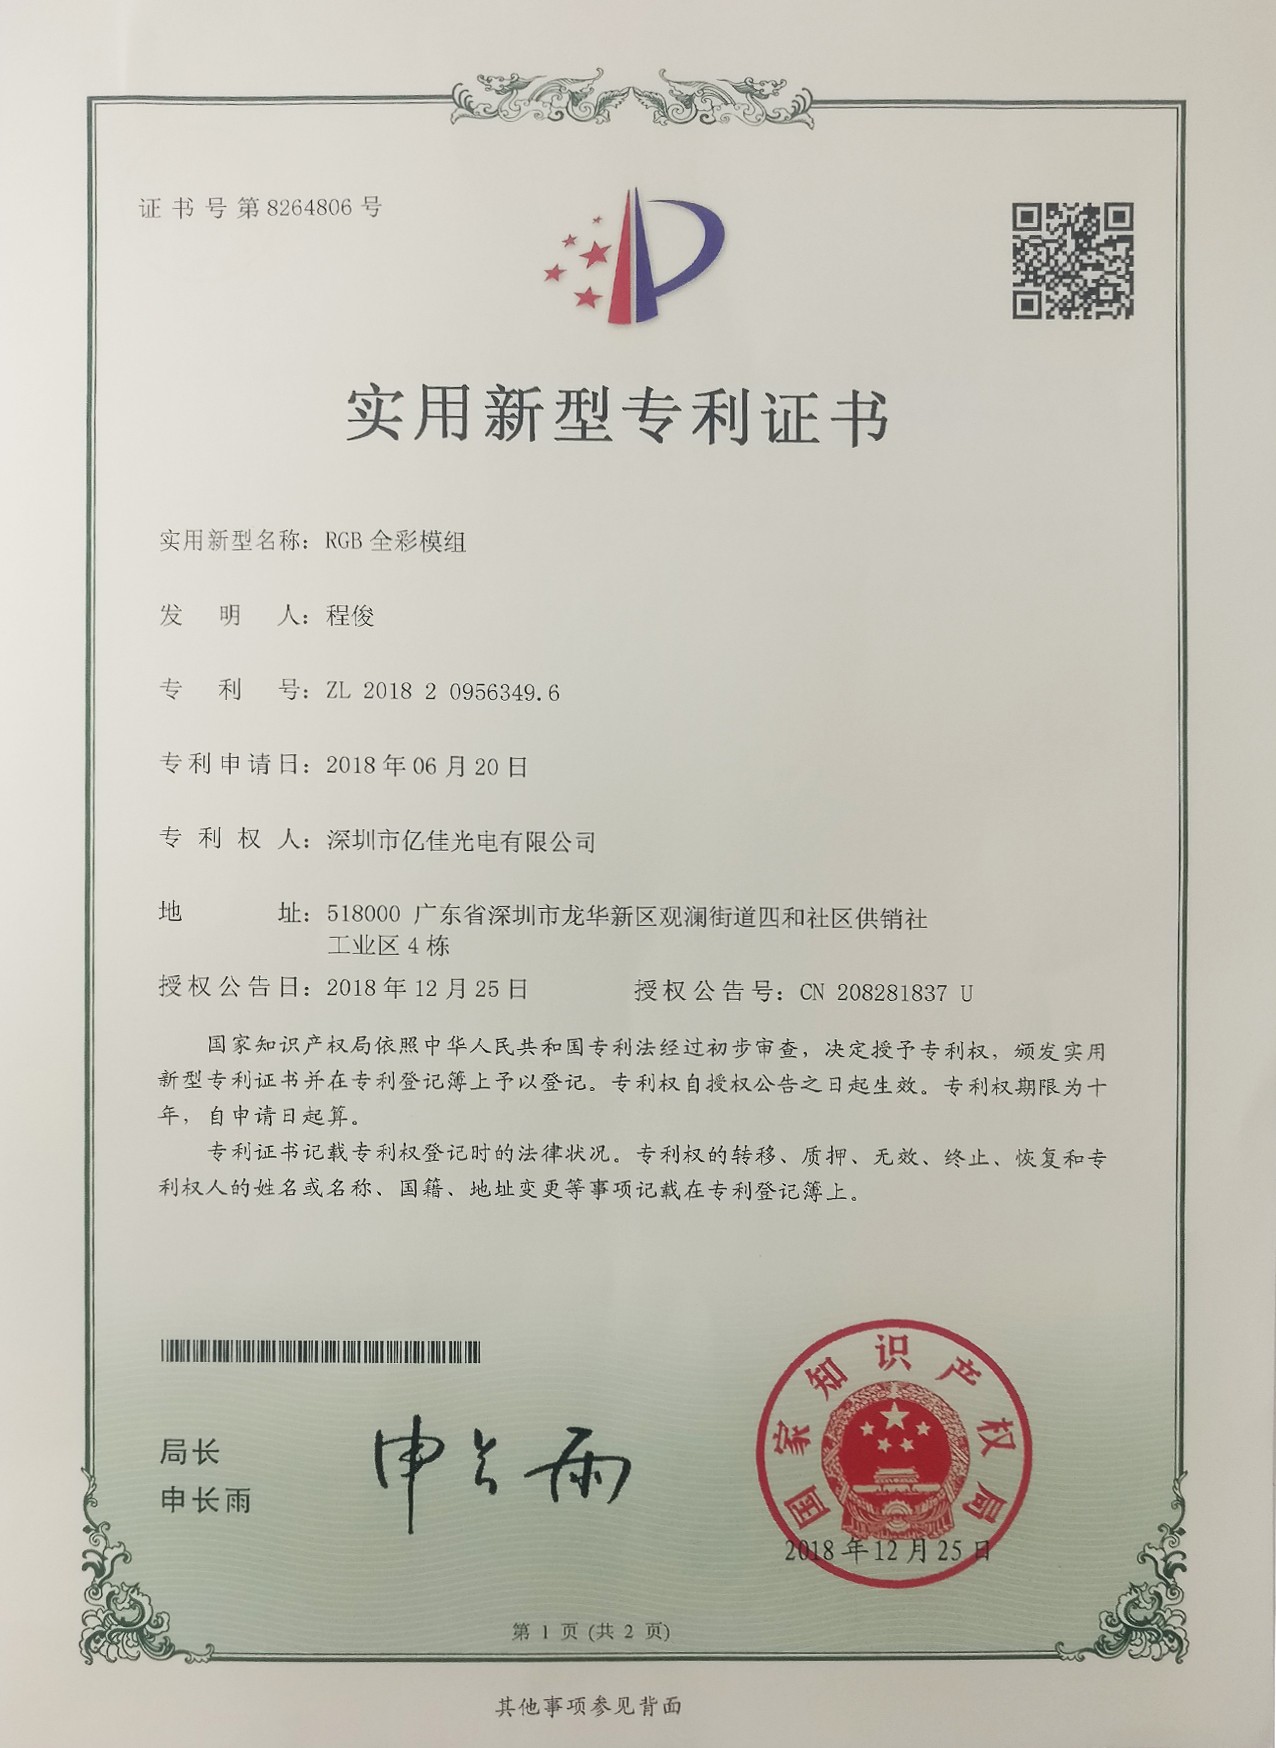 On December 25, 2018, our company obtained two utility model patents.